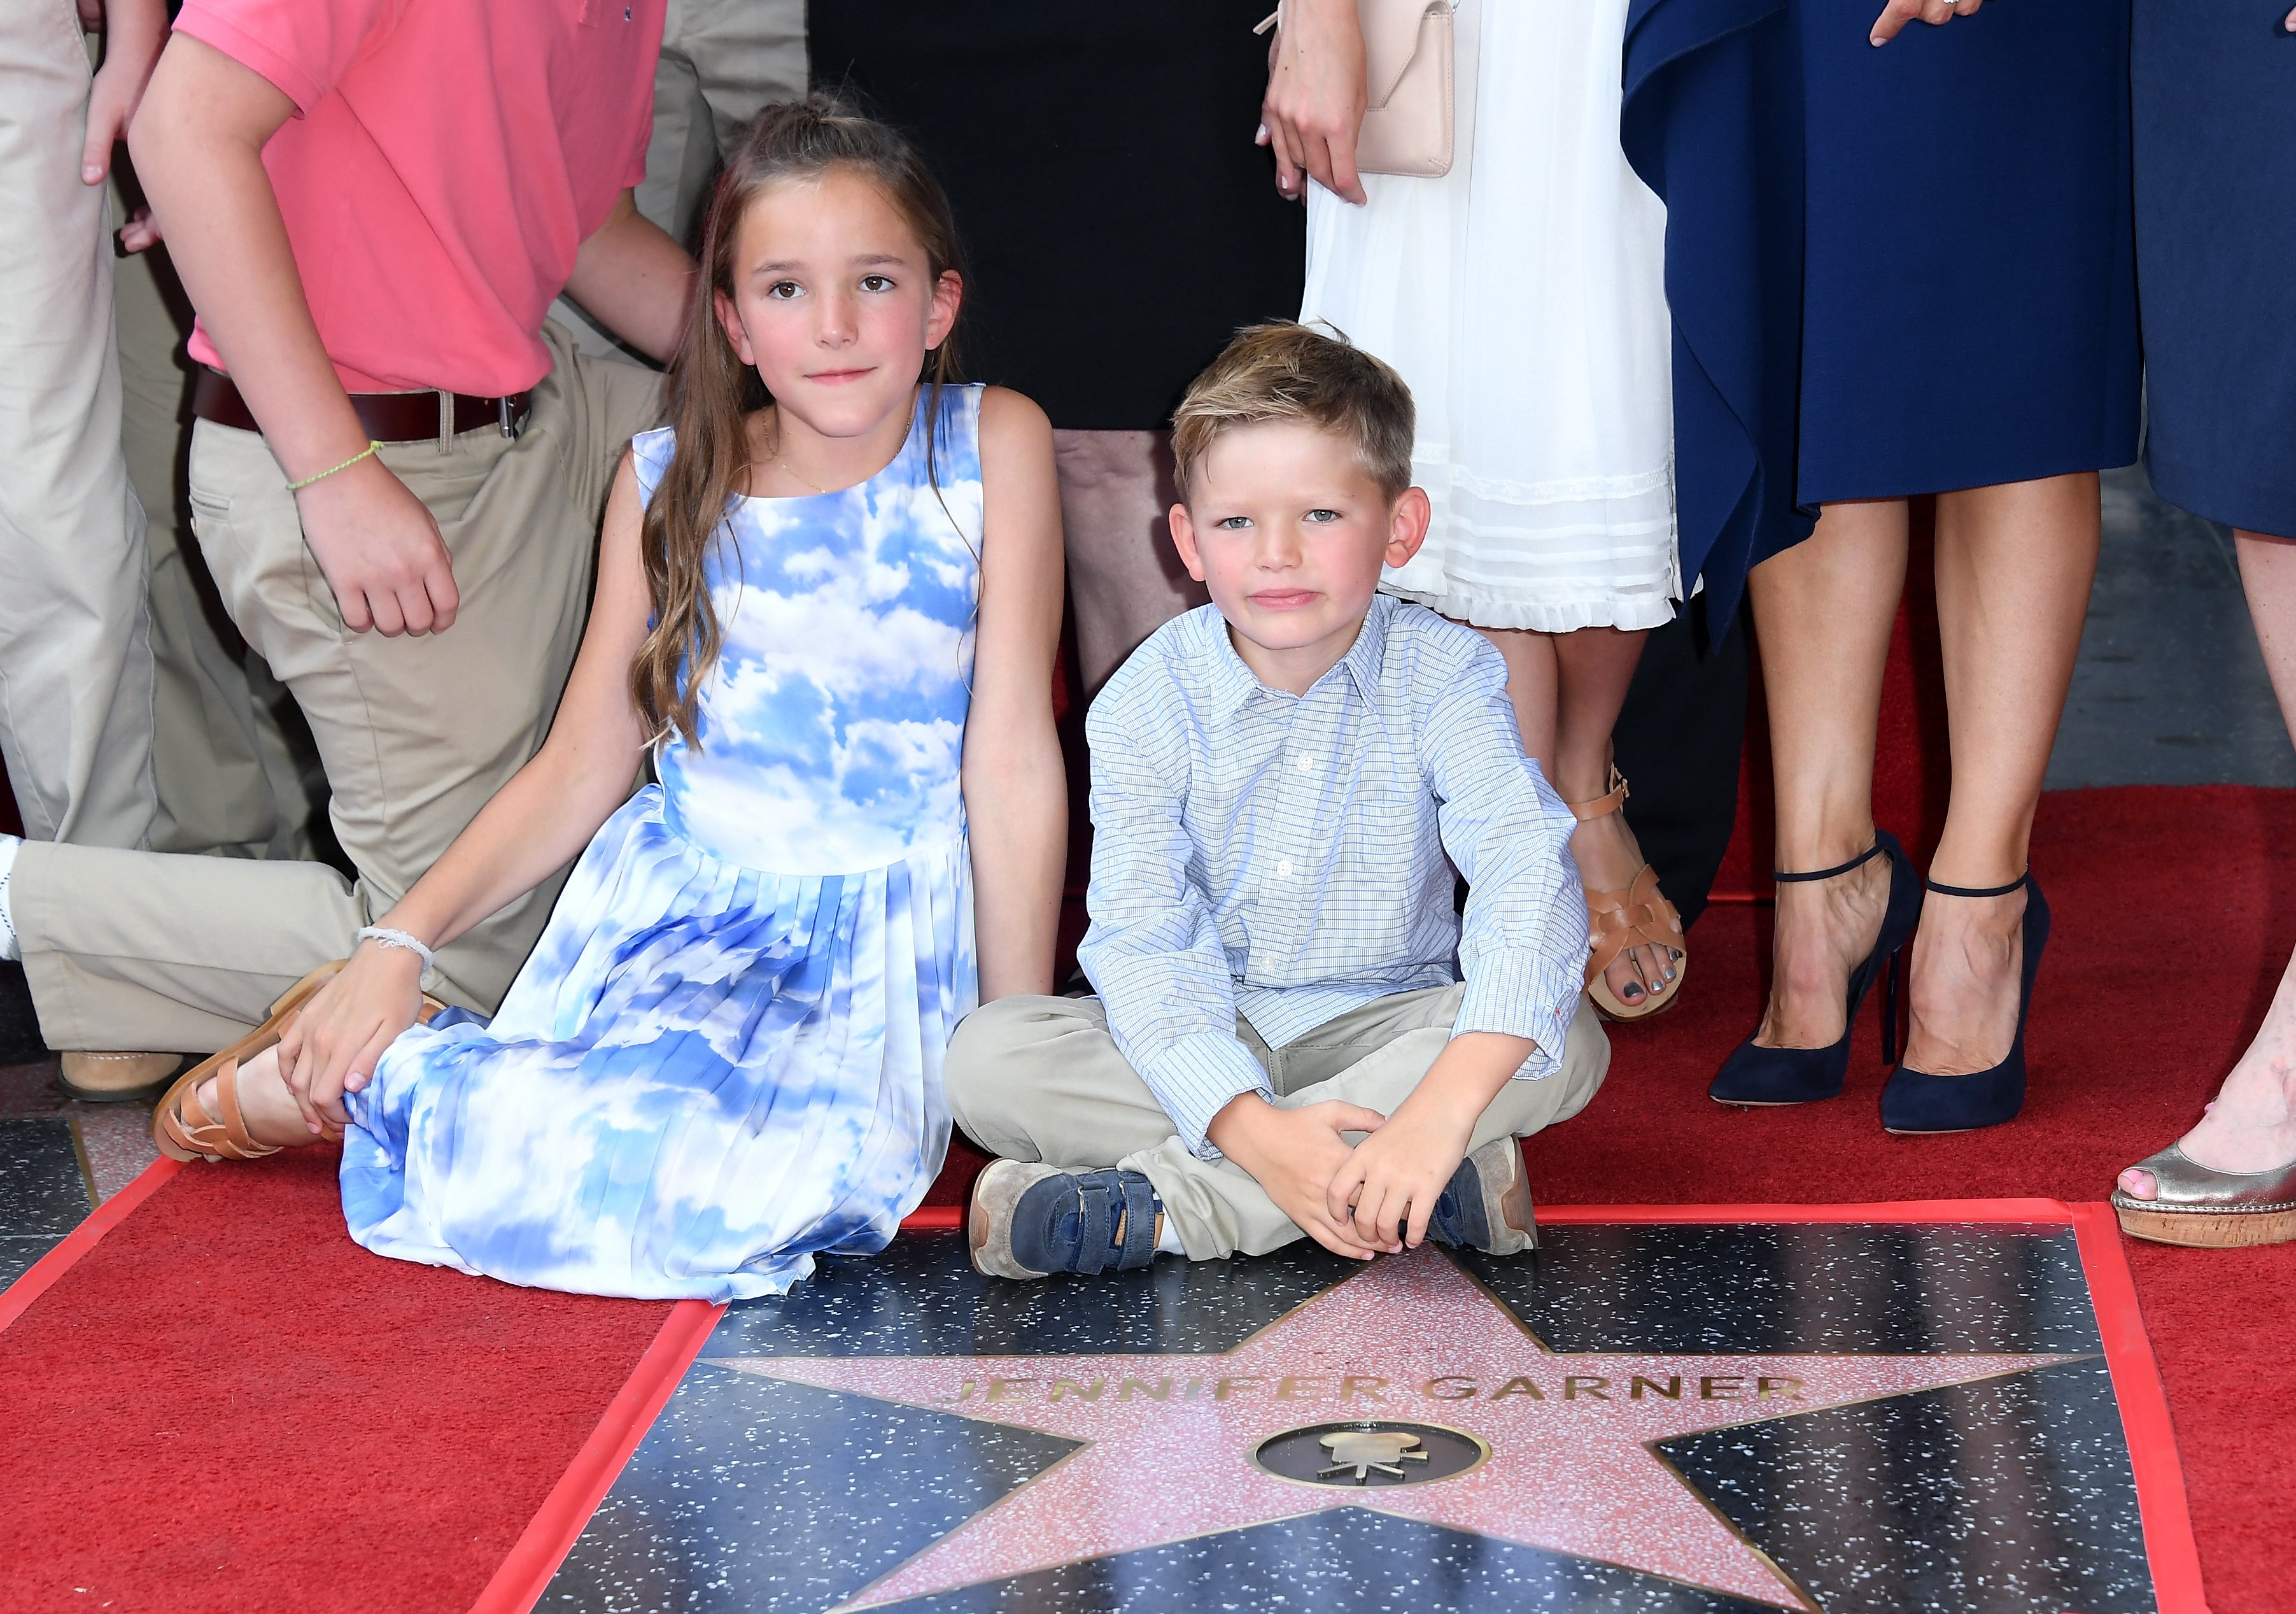 Seraphina Affleck and Samuel Garner Affleck attending the ceremony honoring their mother Jennifer Garner with a star on the Hollywood Walk of Fame on August 20, 2018 in Hollywood, California. / Source: Getty Images